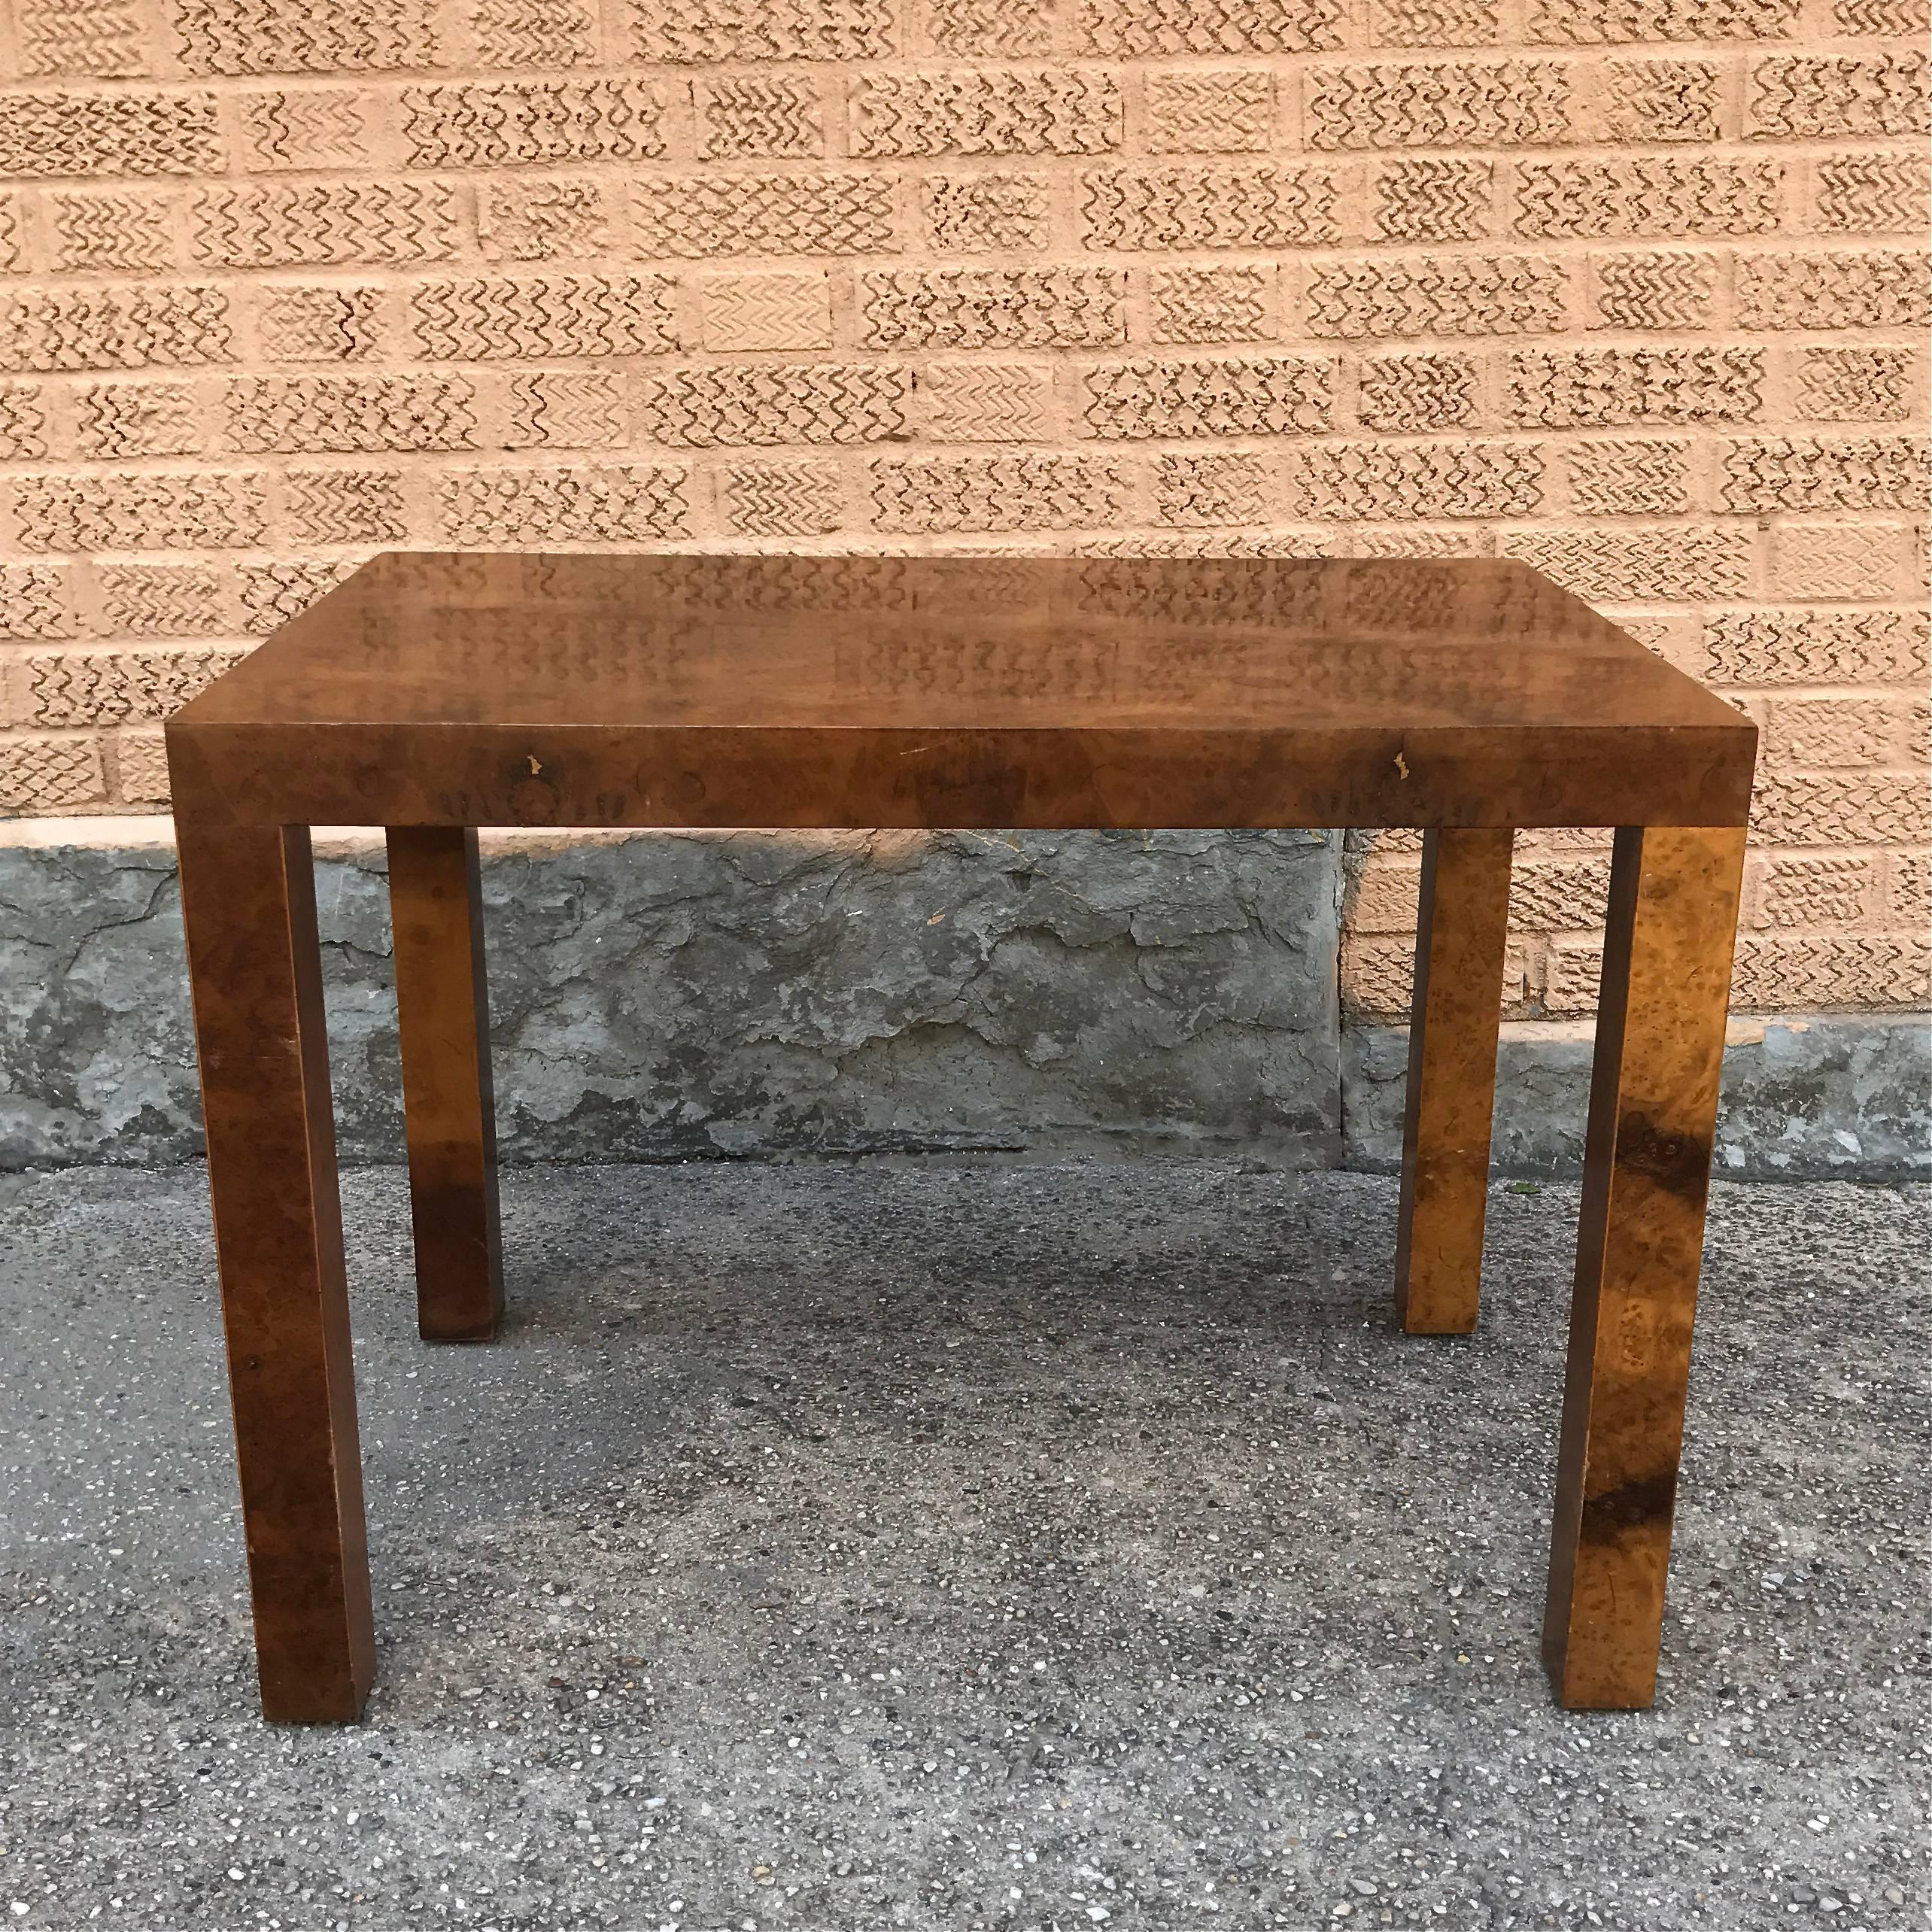 Burled, olive wood, Parsons, side or occasional table designed by Milo Baughman for Directional: The Custom collection.